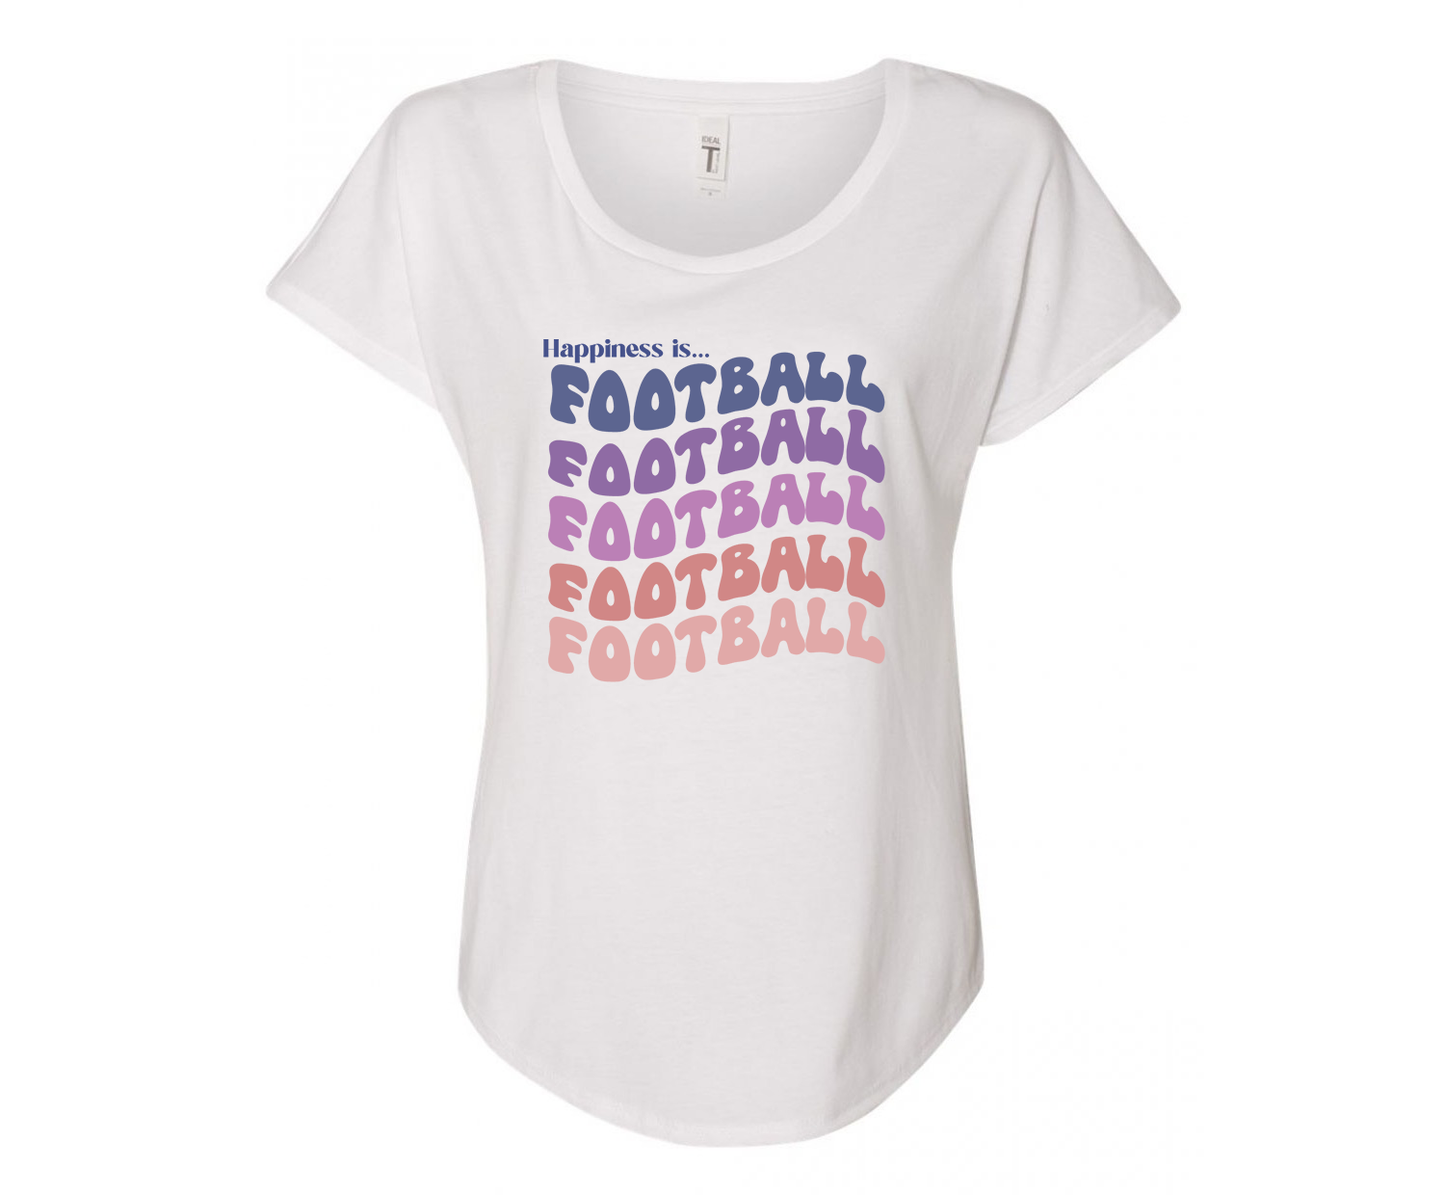 Happiness is Football Ladies Tee Shirt - In White & Grey